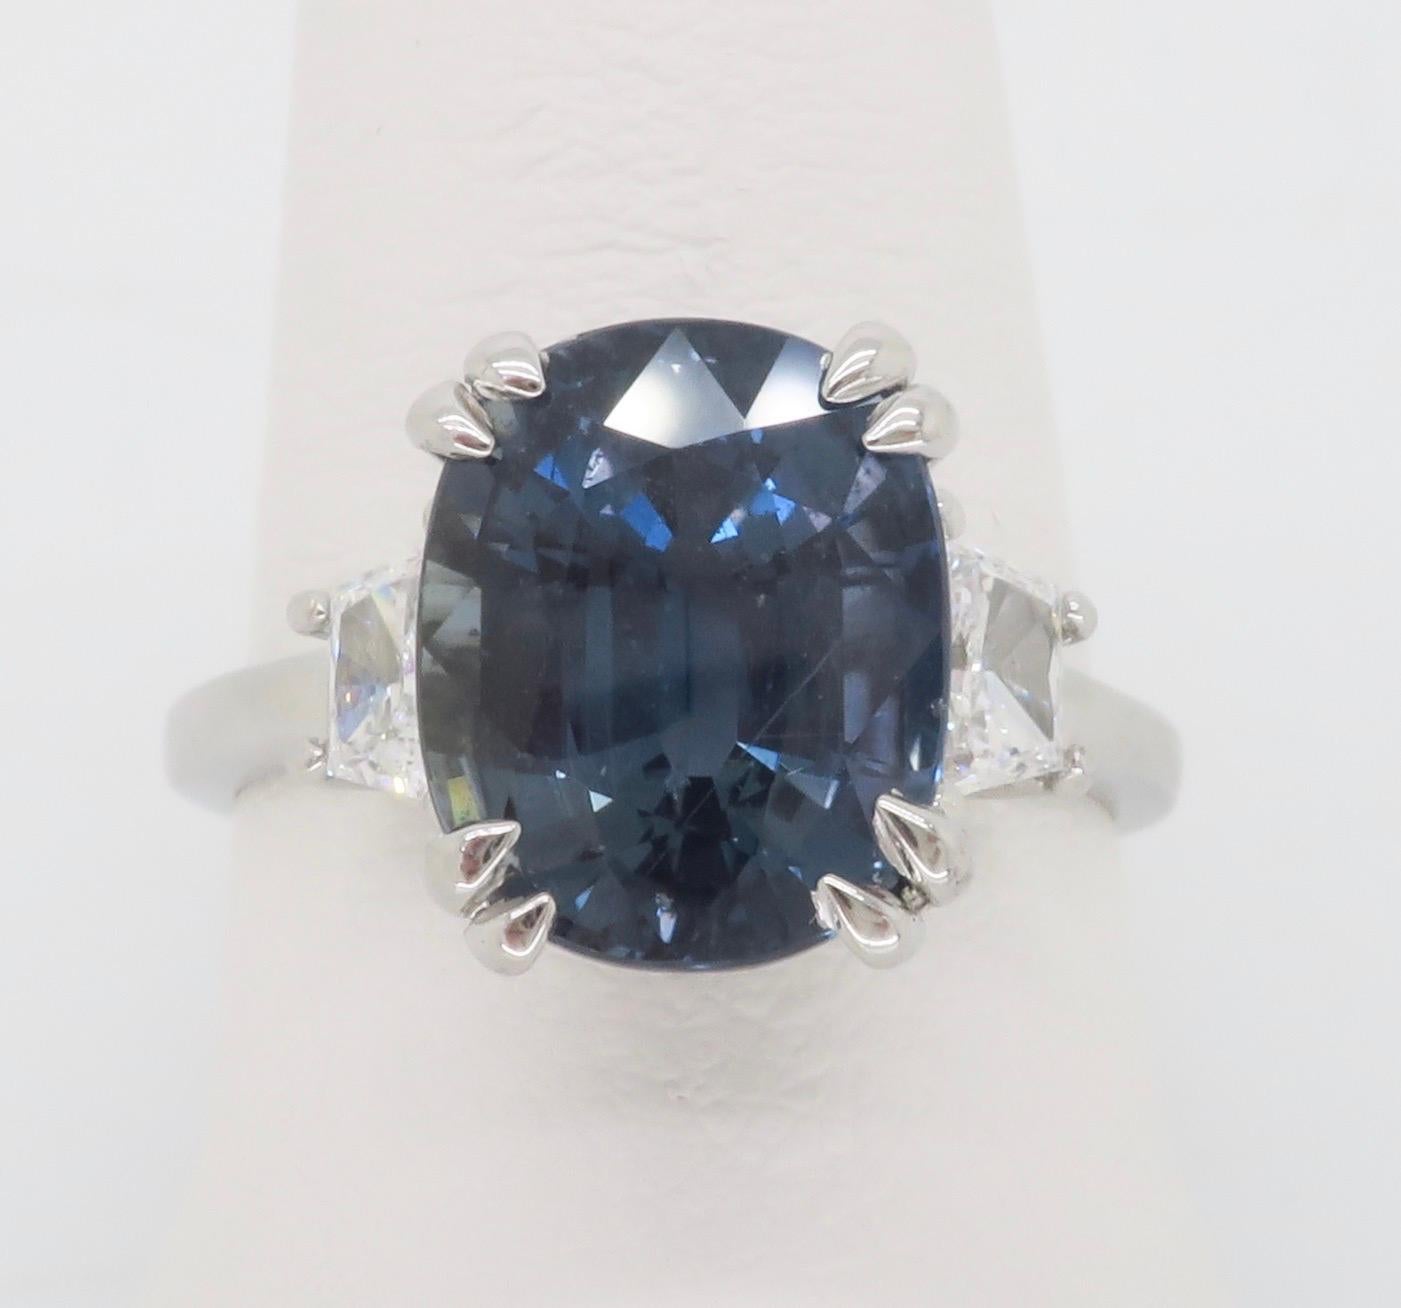 Stunning GIA Certified Unheated, Color Changing Blue Sapphire from Tanzania with strong-vivid saturation, flanked by Trapezoid shaped diamonds. 

Gemstone: Blue Sapphire & Diamond
Sapphire Carat Weight: 7.21CT 
Sapphire Shape: Oval
Certification